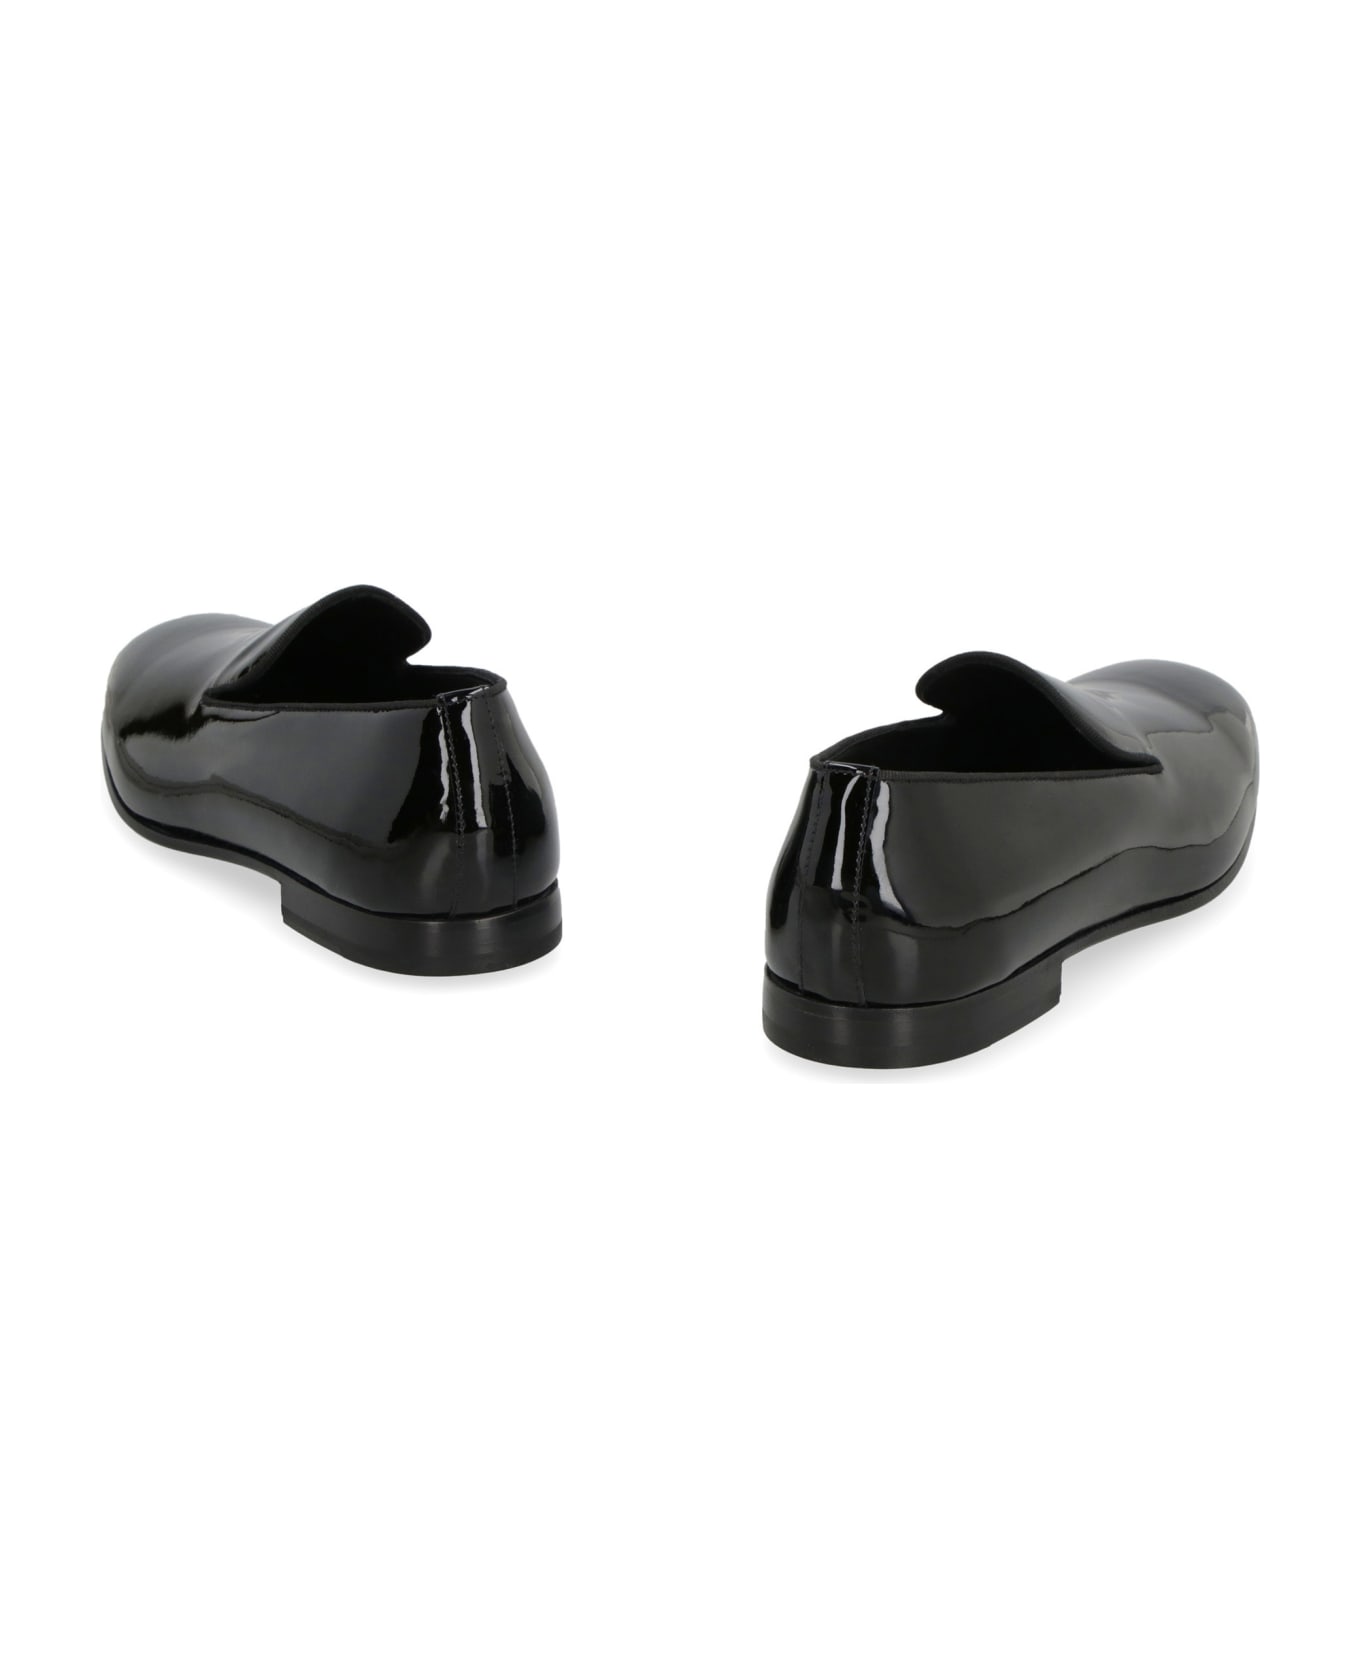 Doucal's Patent Leather Loafer - black